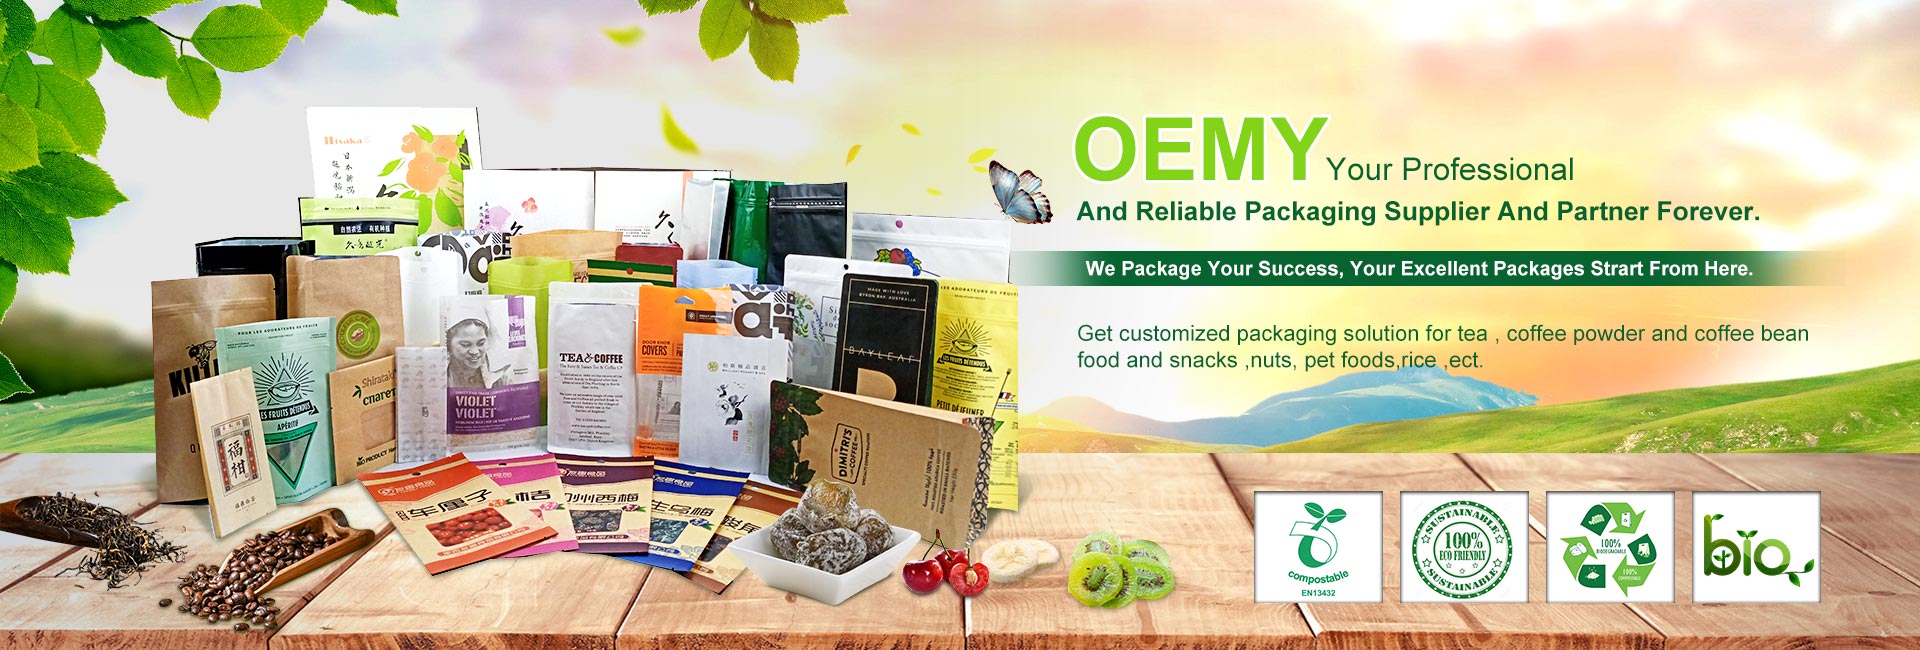 OEMY Your Professional And Reliable Packaging Supplier And Socius Aeternus.